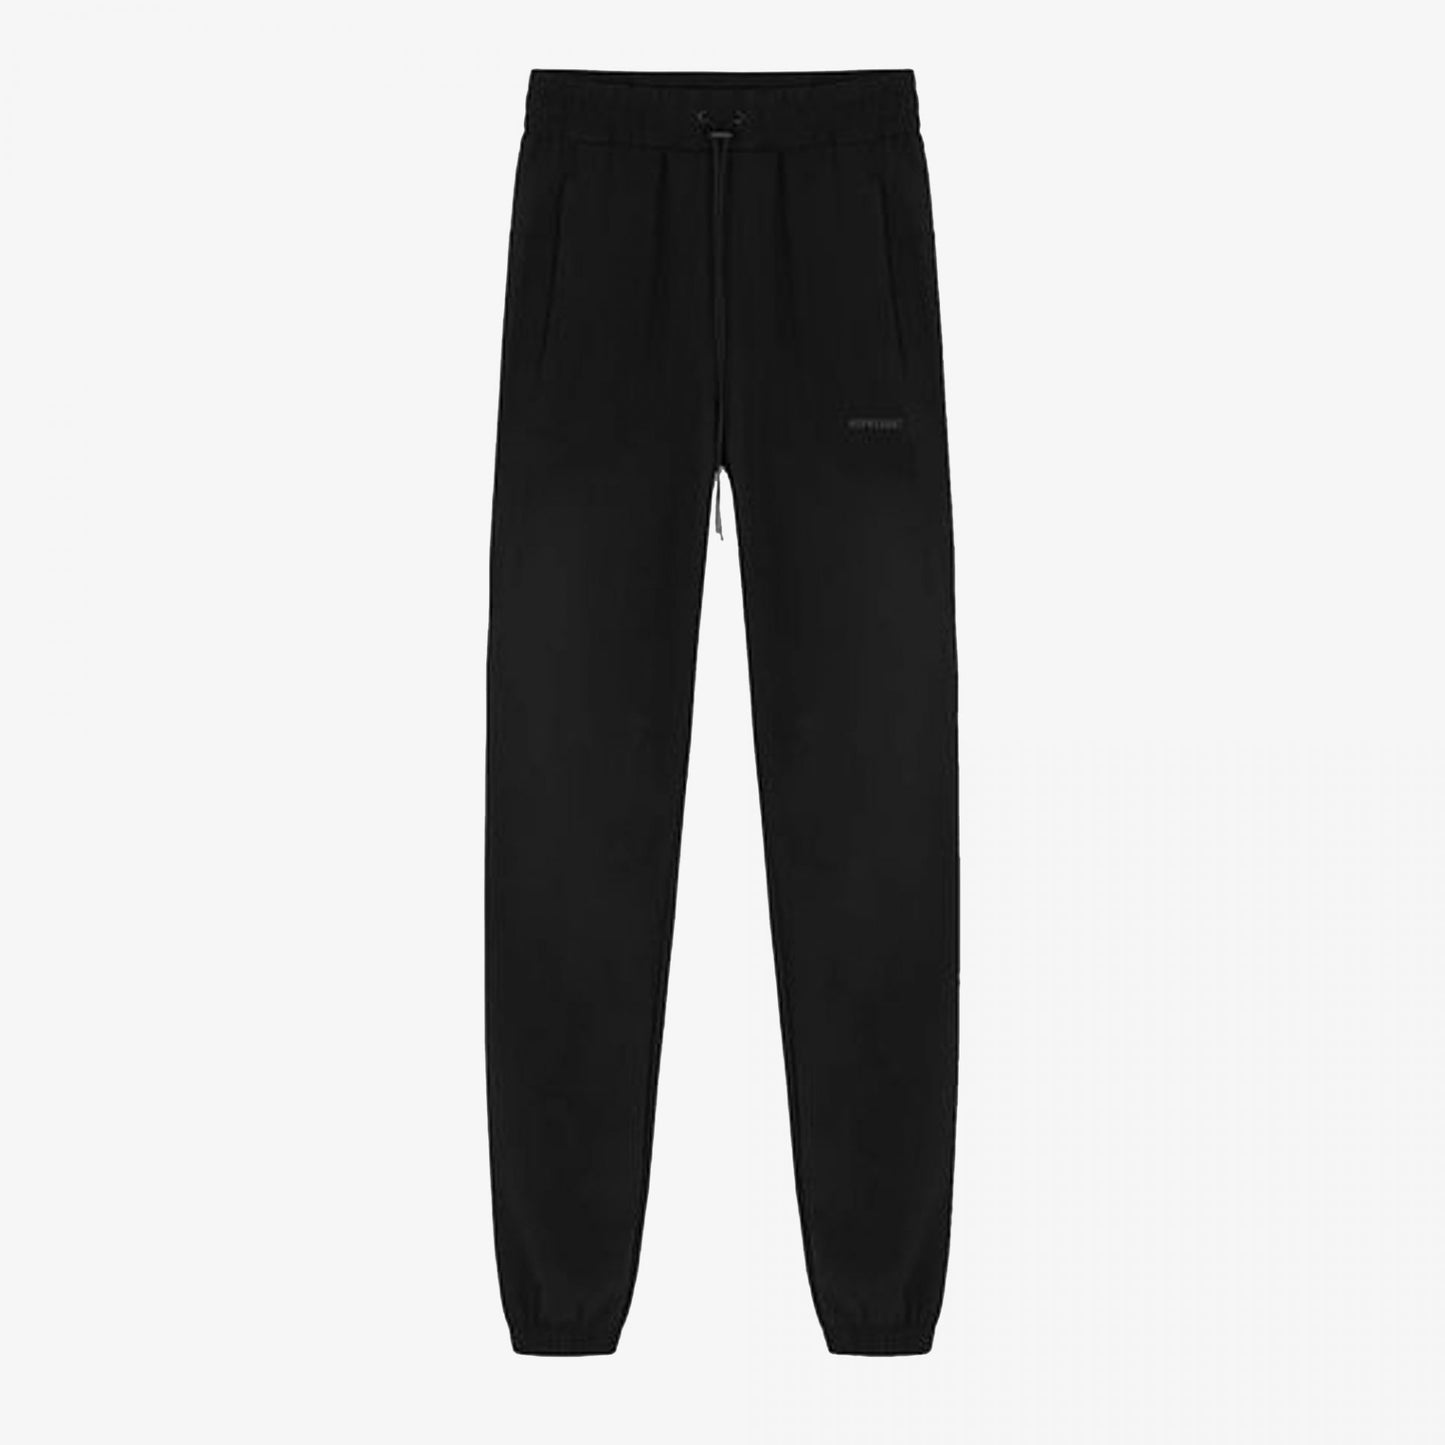 OWNERS CLUB RELAXED SWEATPANT 'BLACK'